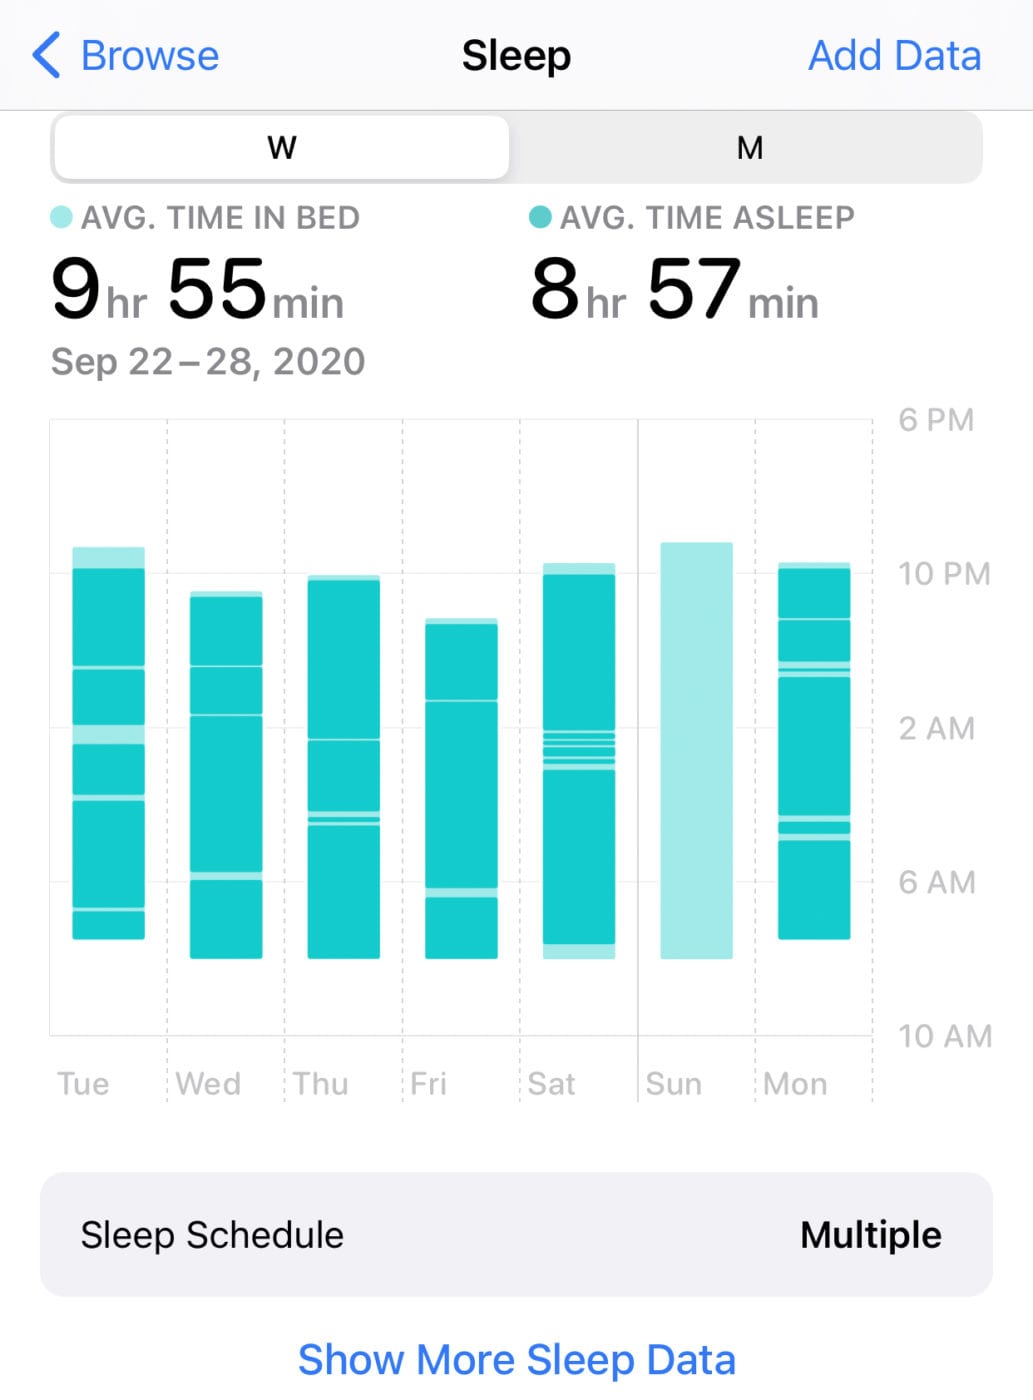 Viewing recent sleep history in the Sleep section of the iPhone Health app